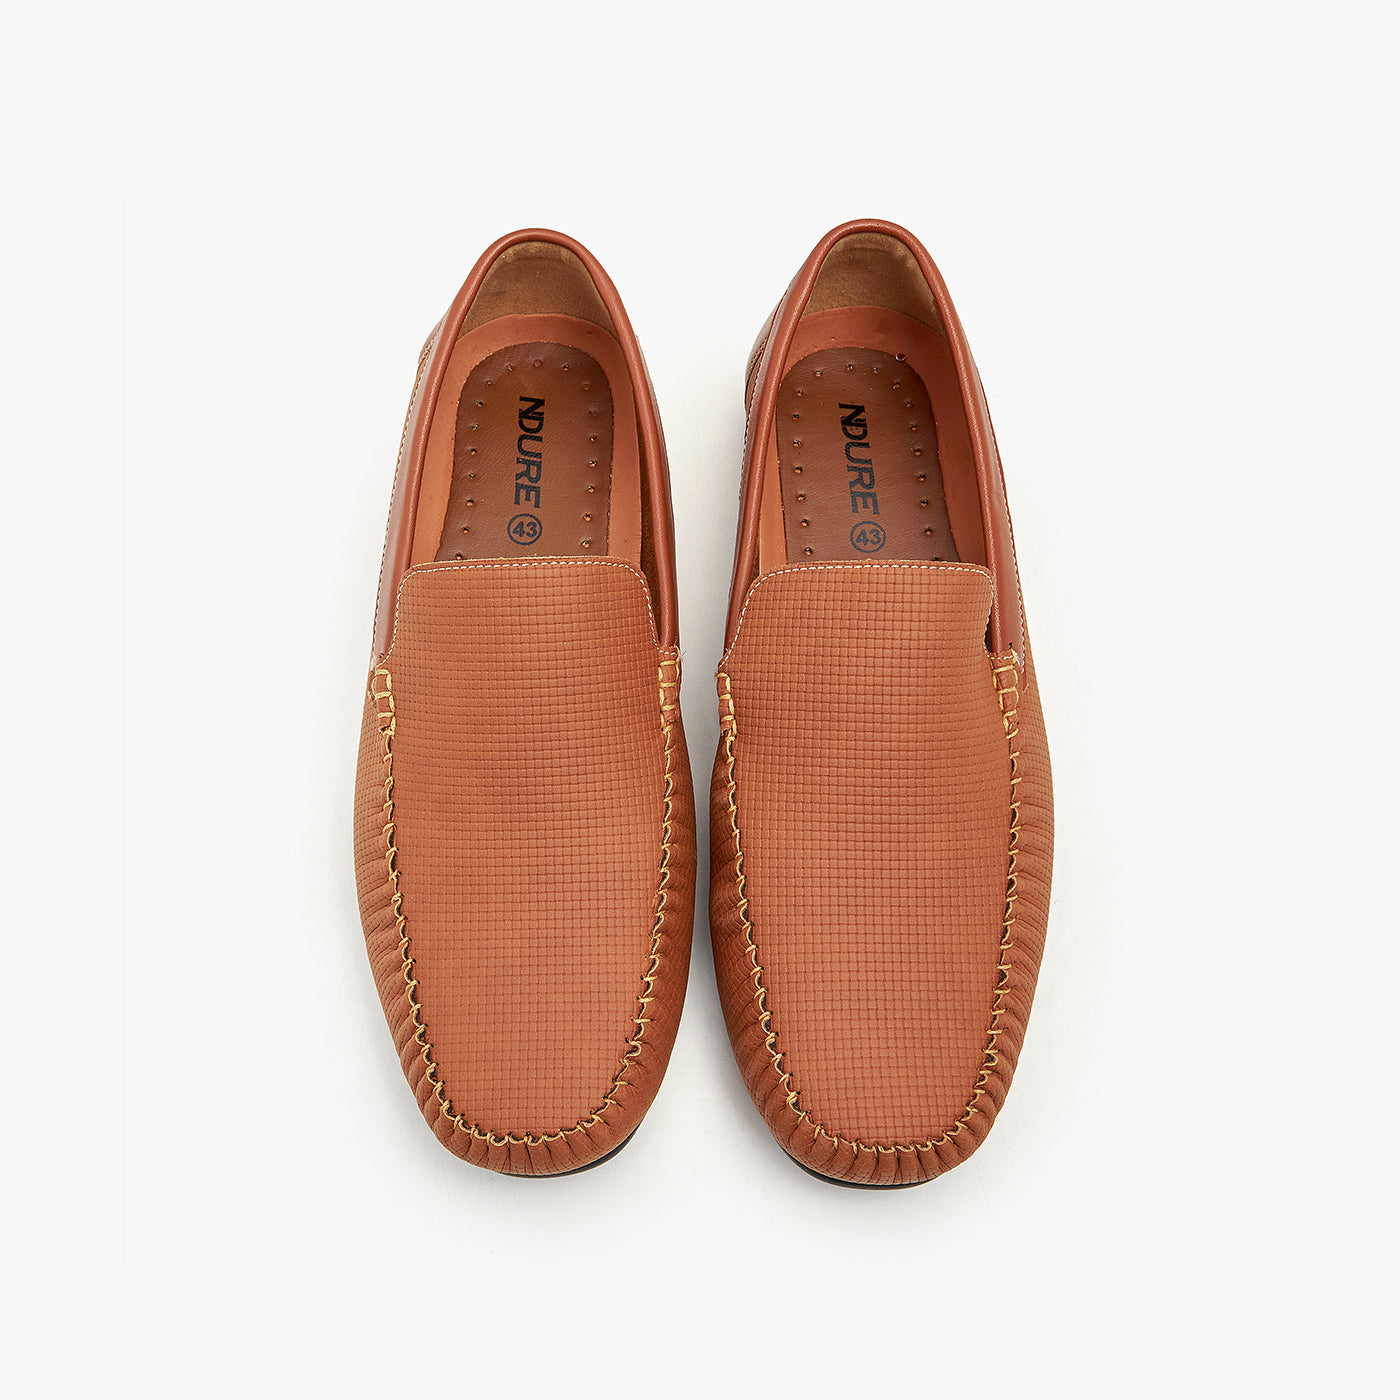 Comfortable Men's Loafers